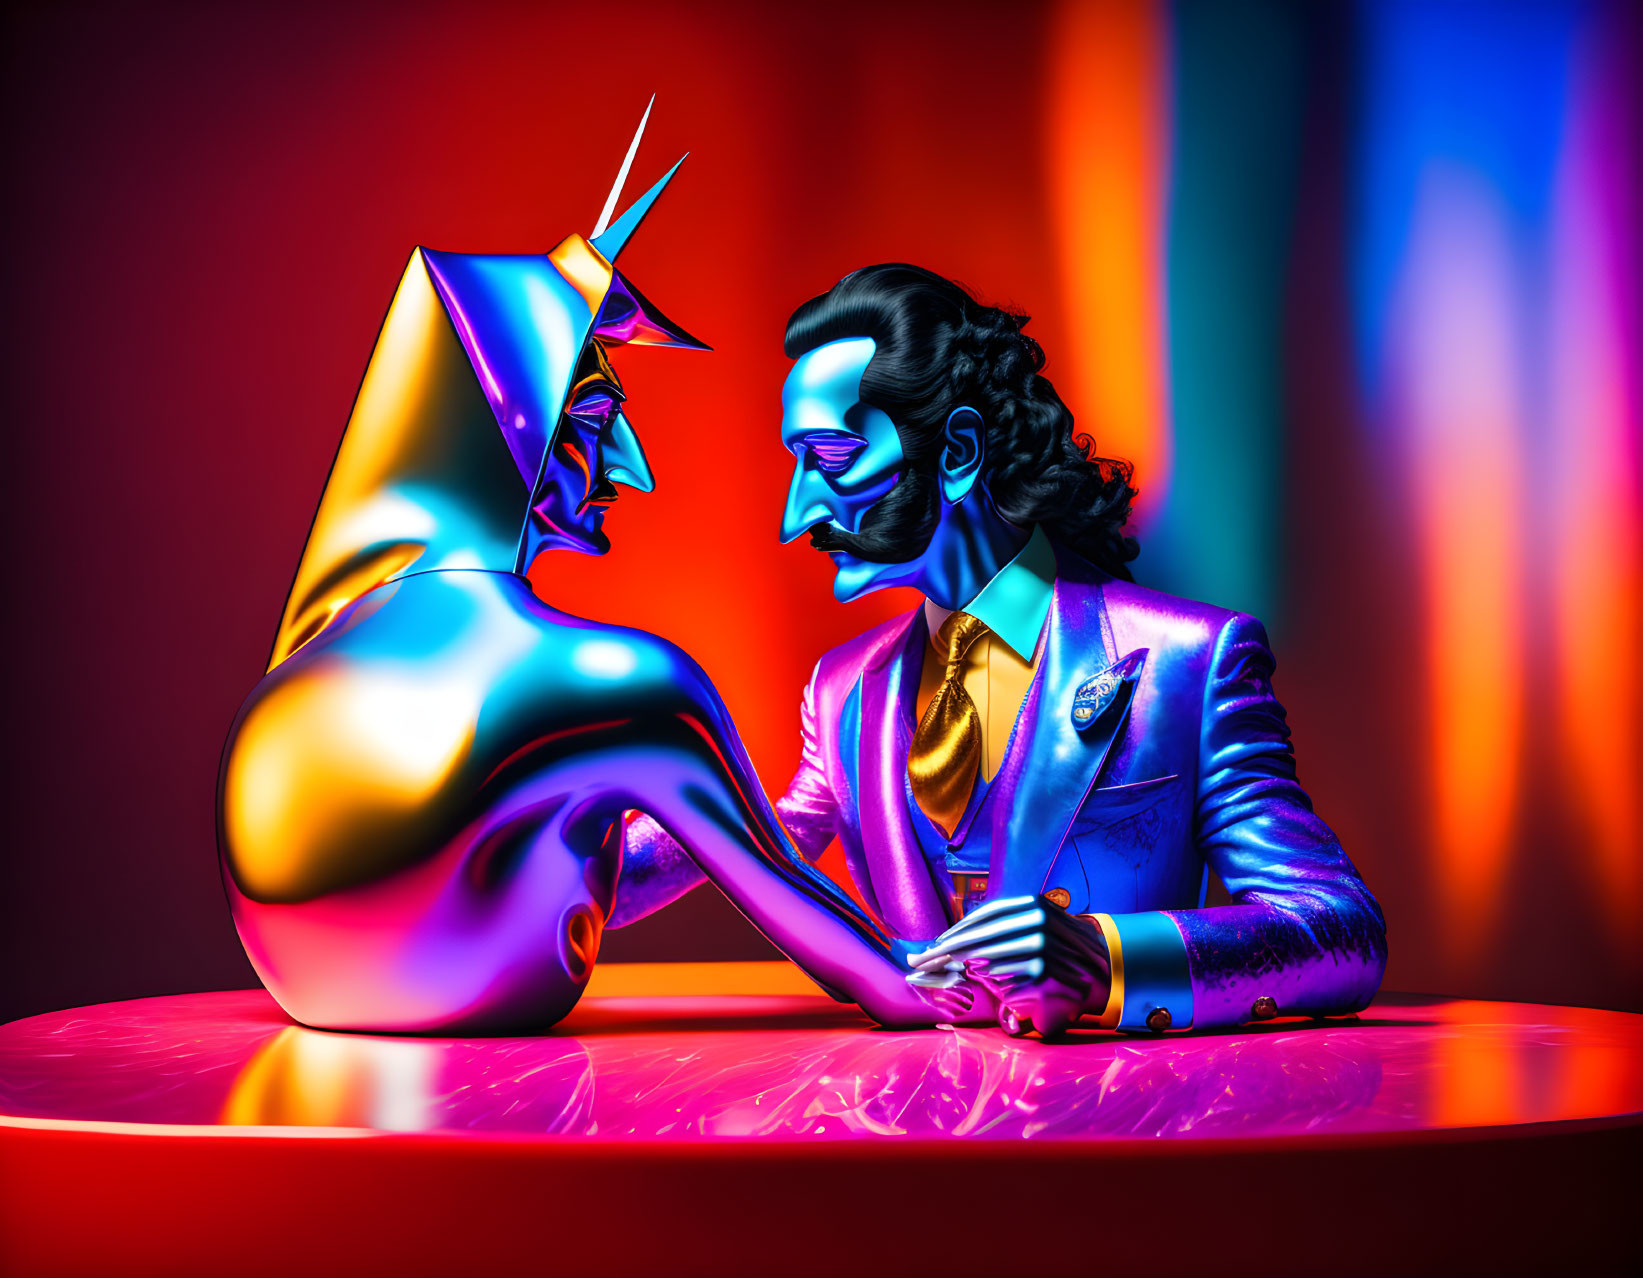 Vibrantly colored stylized figures at a table under neon lights